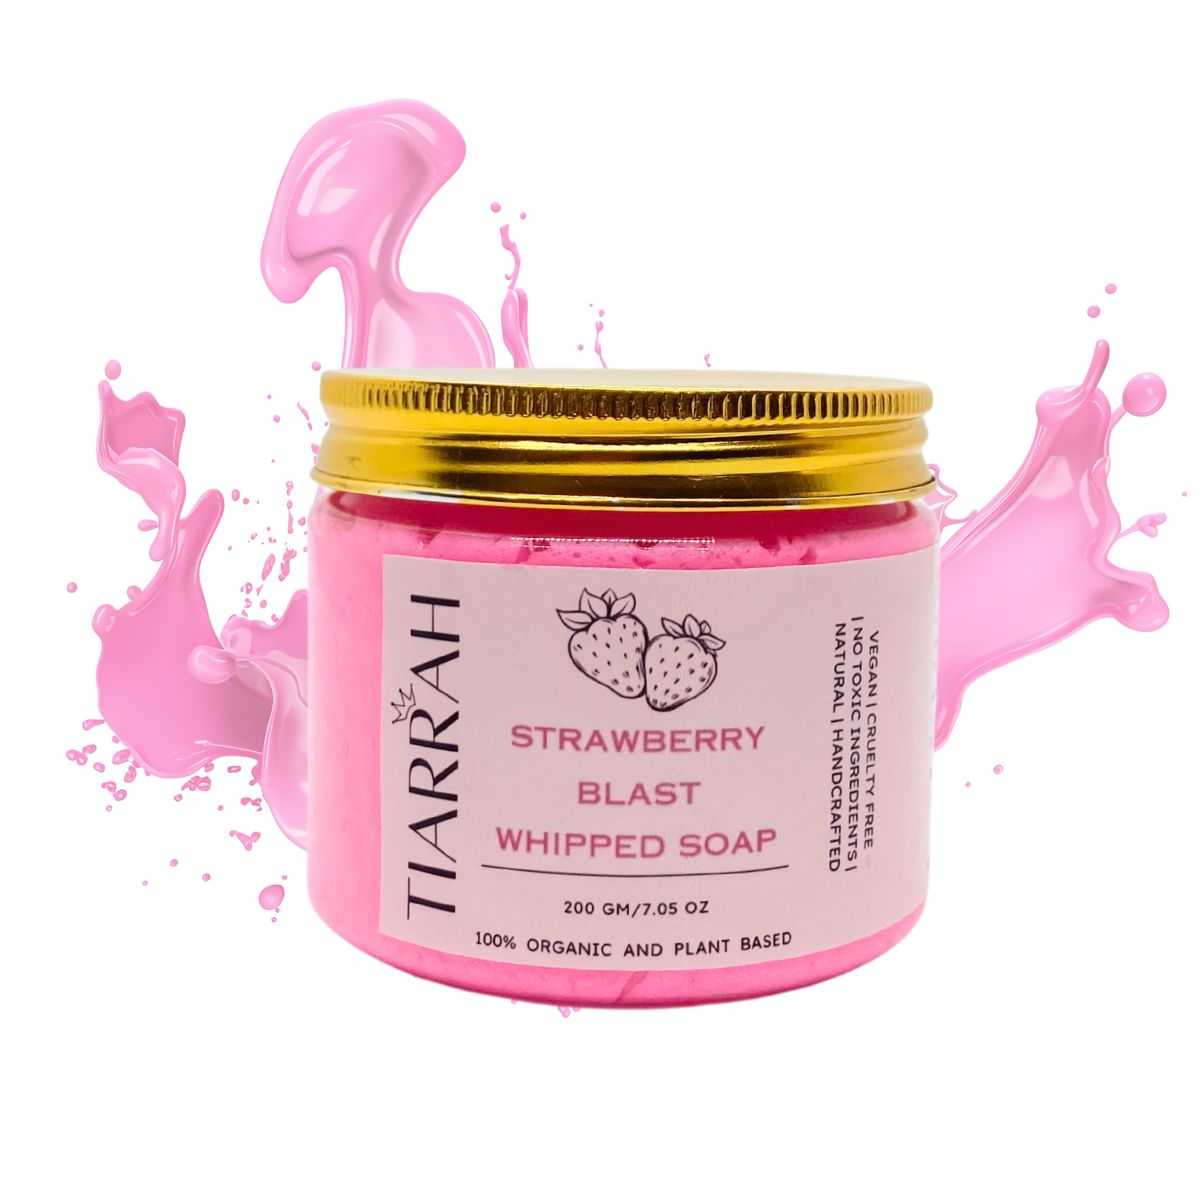 Tiarrah Strawberry Blast Whipped Soap: Natural, Organic, Non-Toxic - The Luxury Bath and Body Care Shop